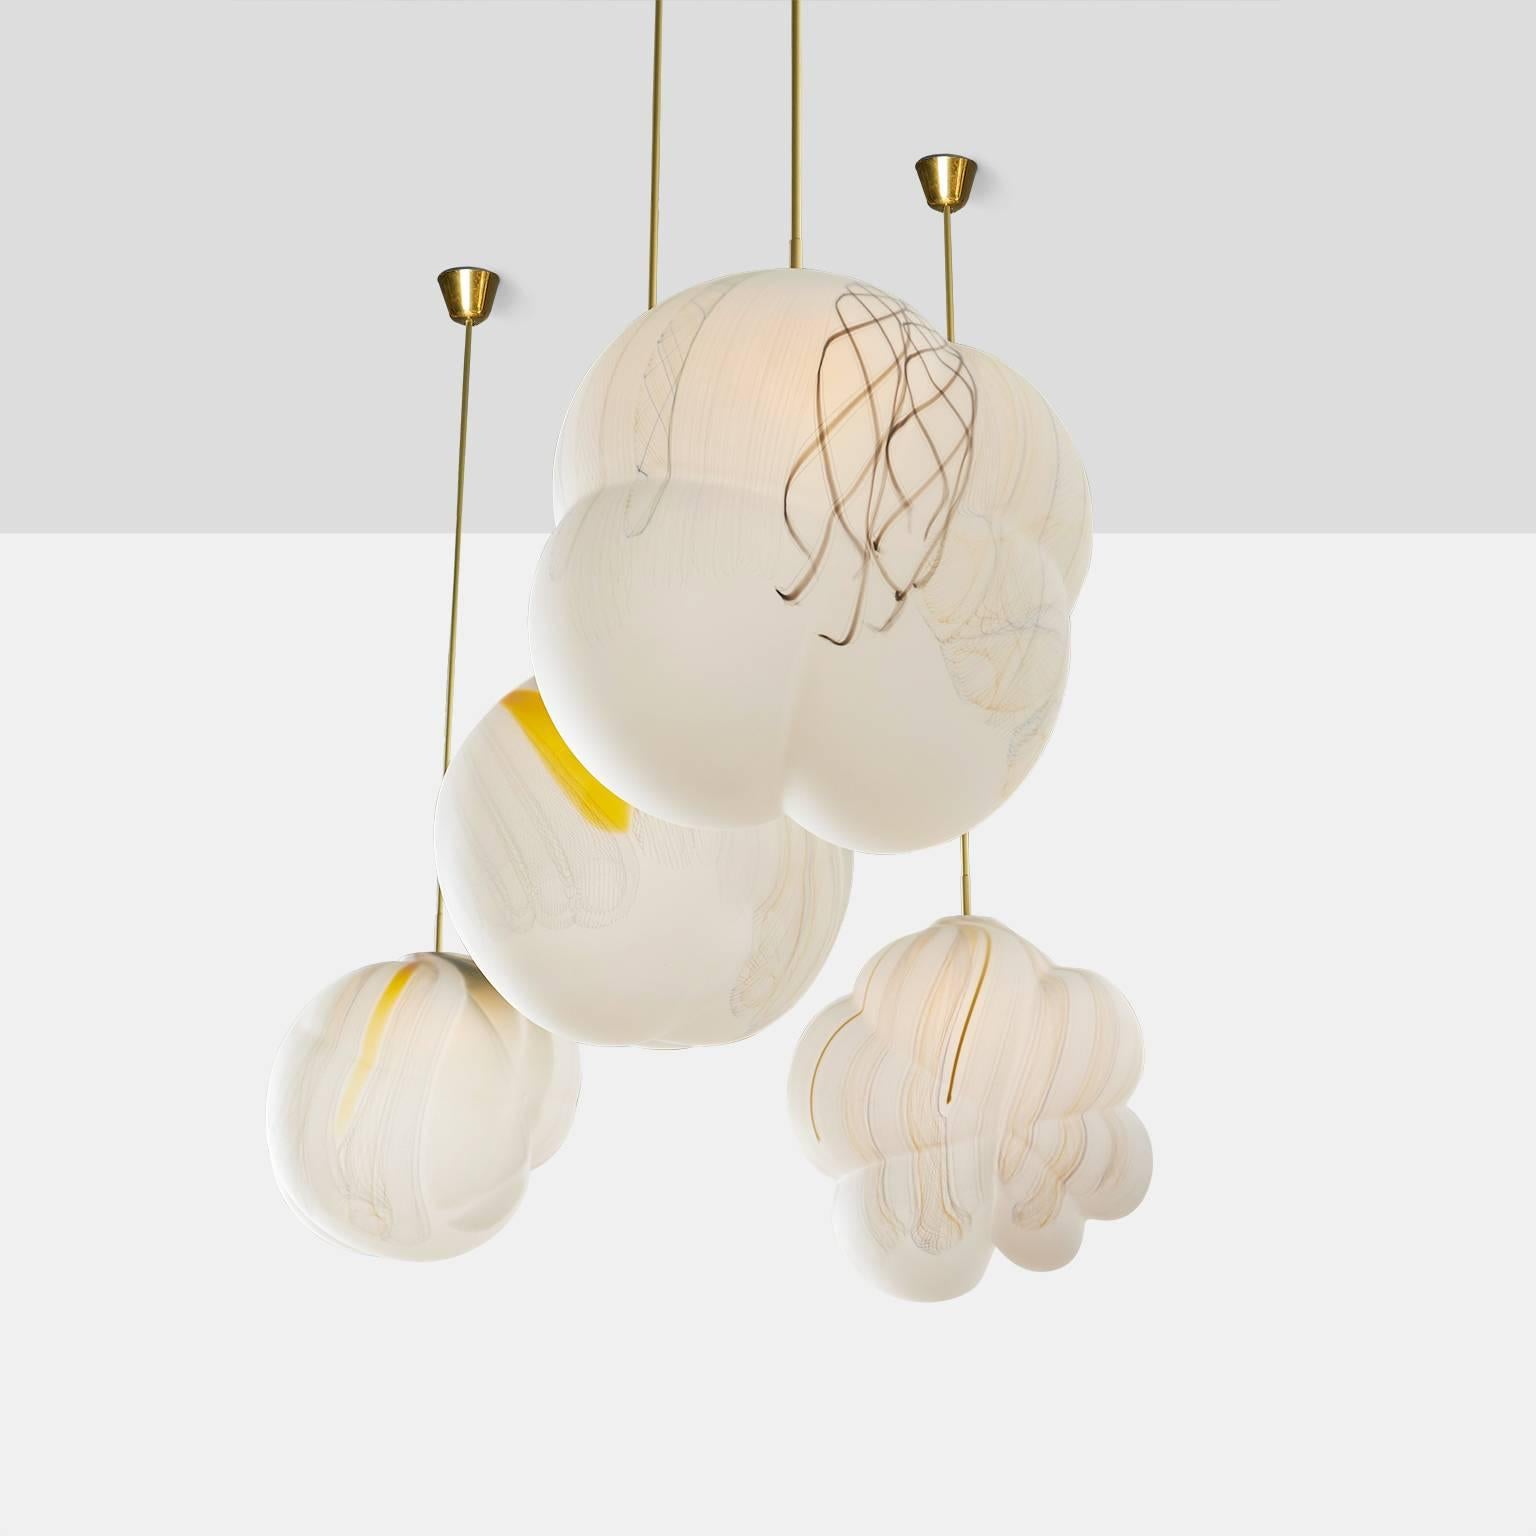 A collection of free handblown glass cloud shaped pendants with an inlaid pattern of colored glass. Each is one of a kind and features a unique installation with built in LED chip.
Almond & Company is the exclusive gallery in the U.S. to represent